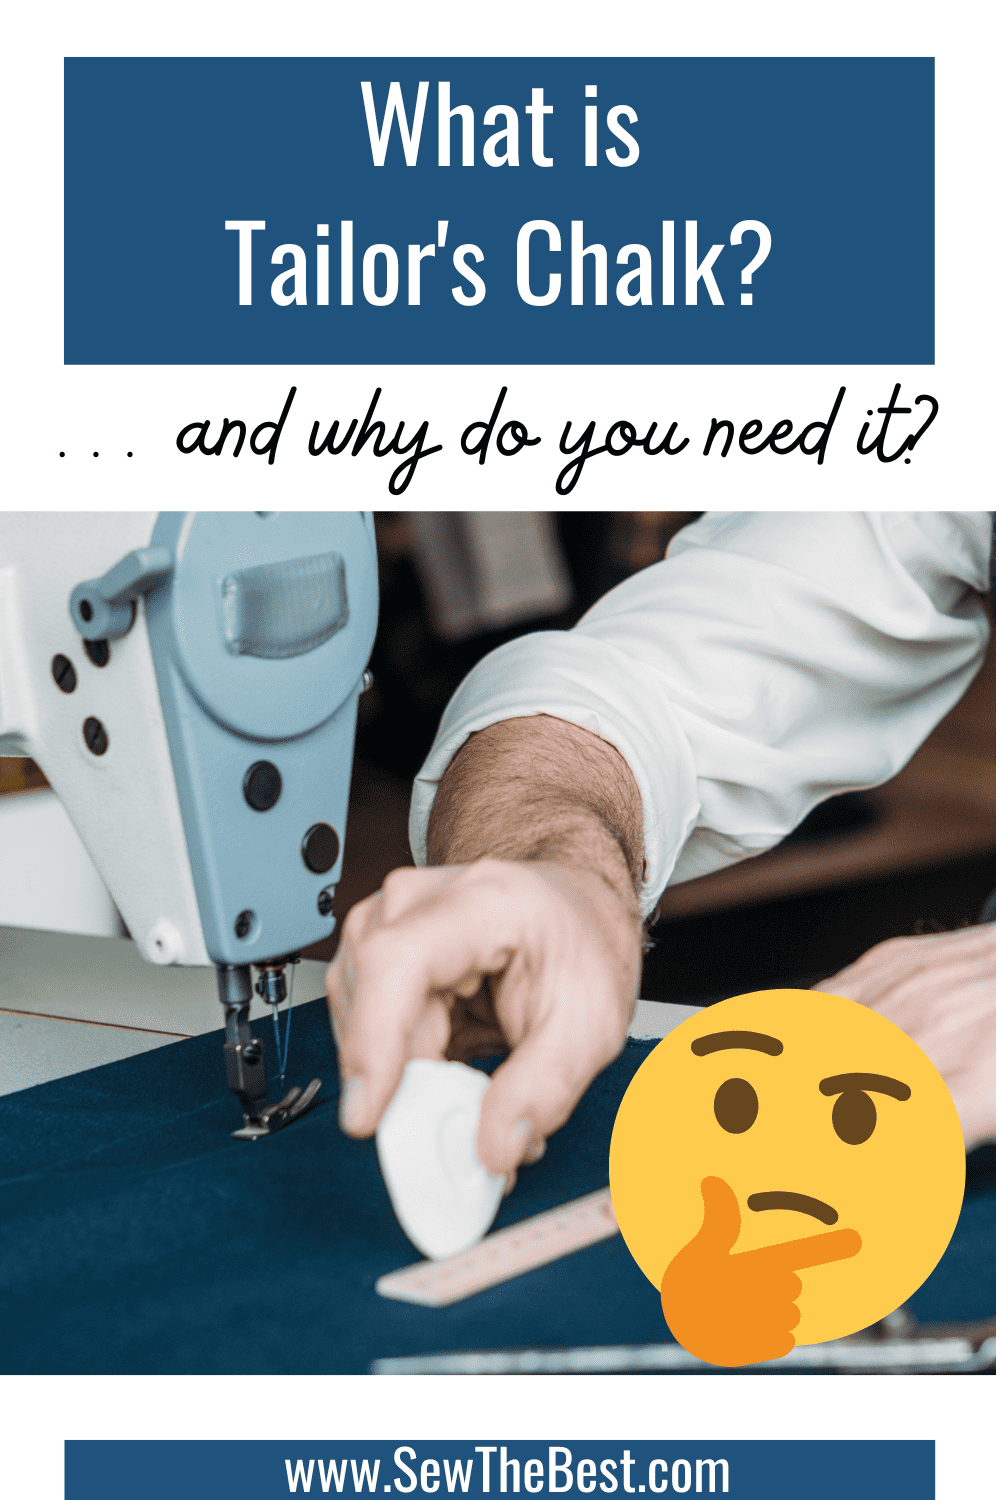 What is Tailor's Chalk? ... and why do you need it? Picture of a person using white tailor's chalk to mark fabric follows.